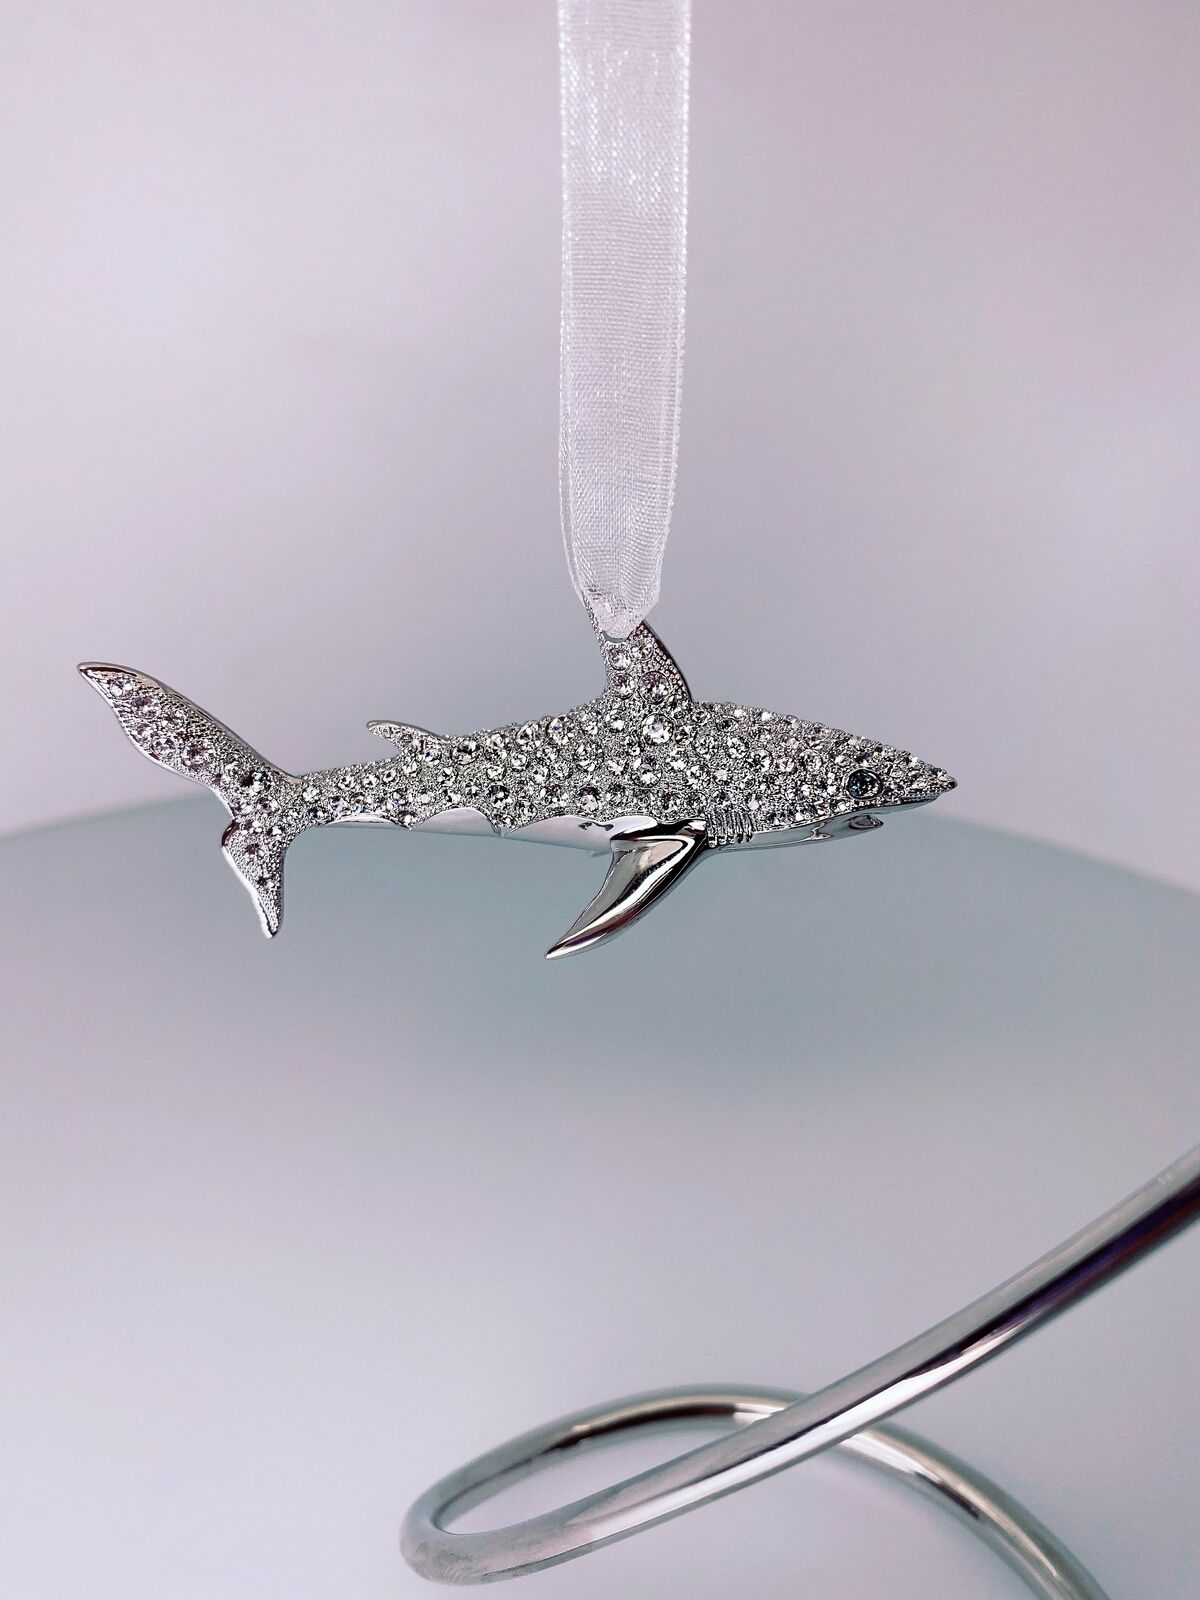 Crystal Shark Ornament created exclusively by Swarovski™ in Rose Gold or Rhodium